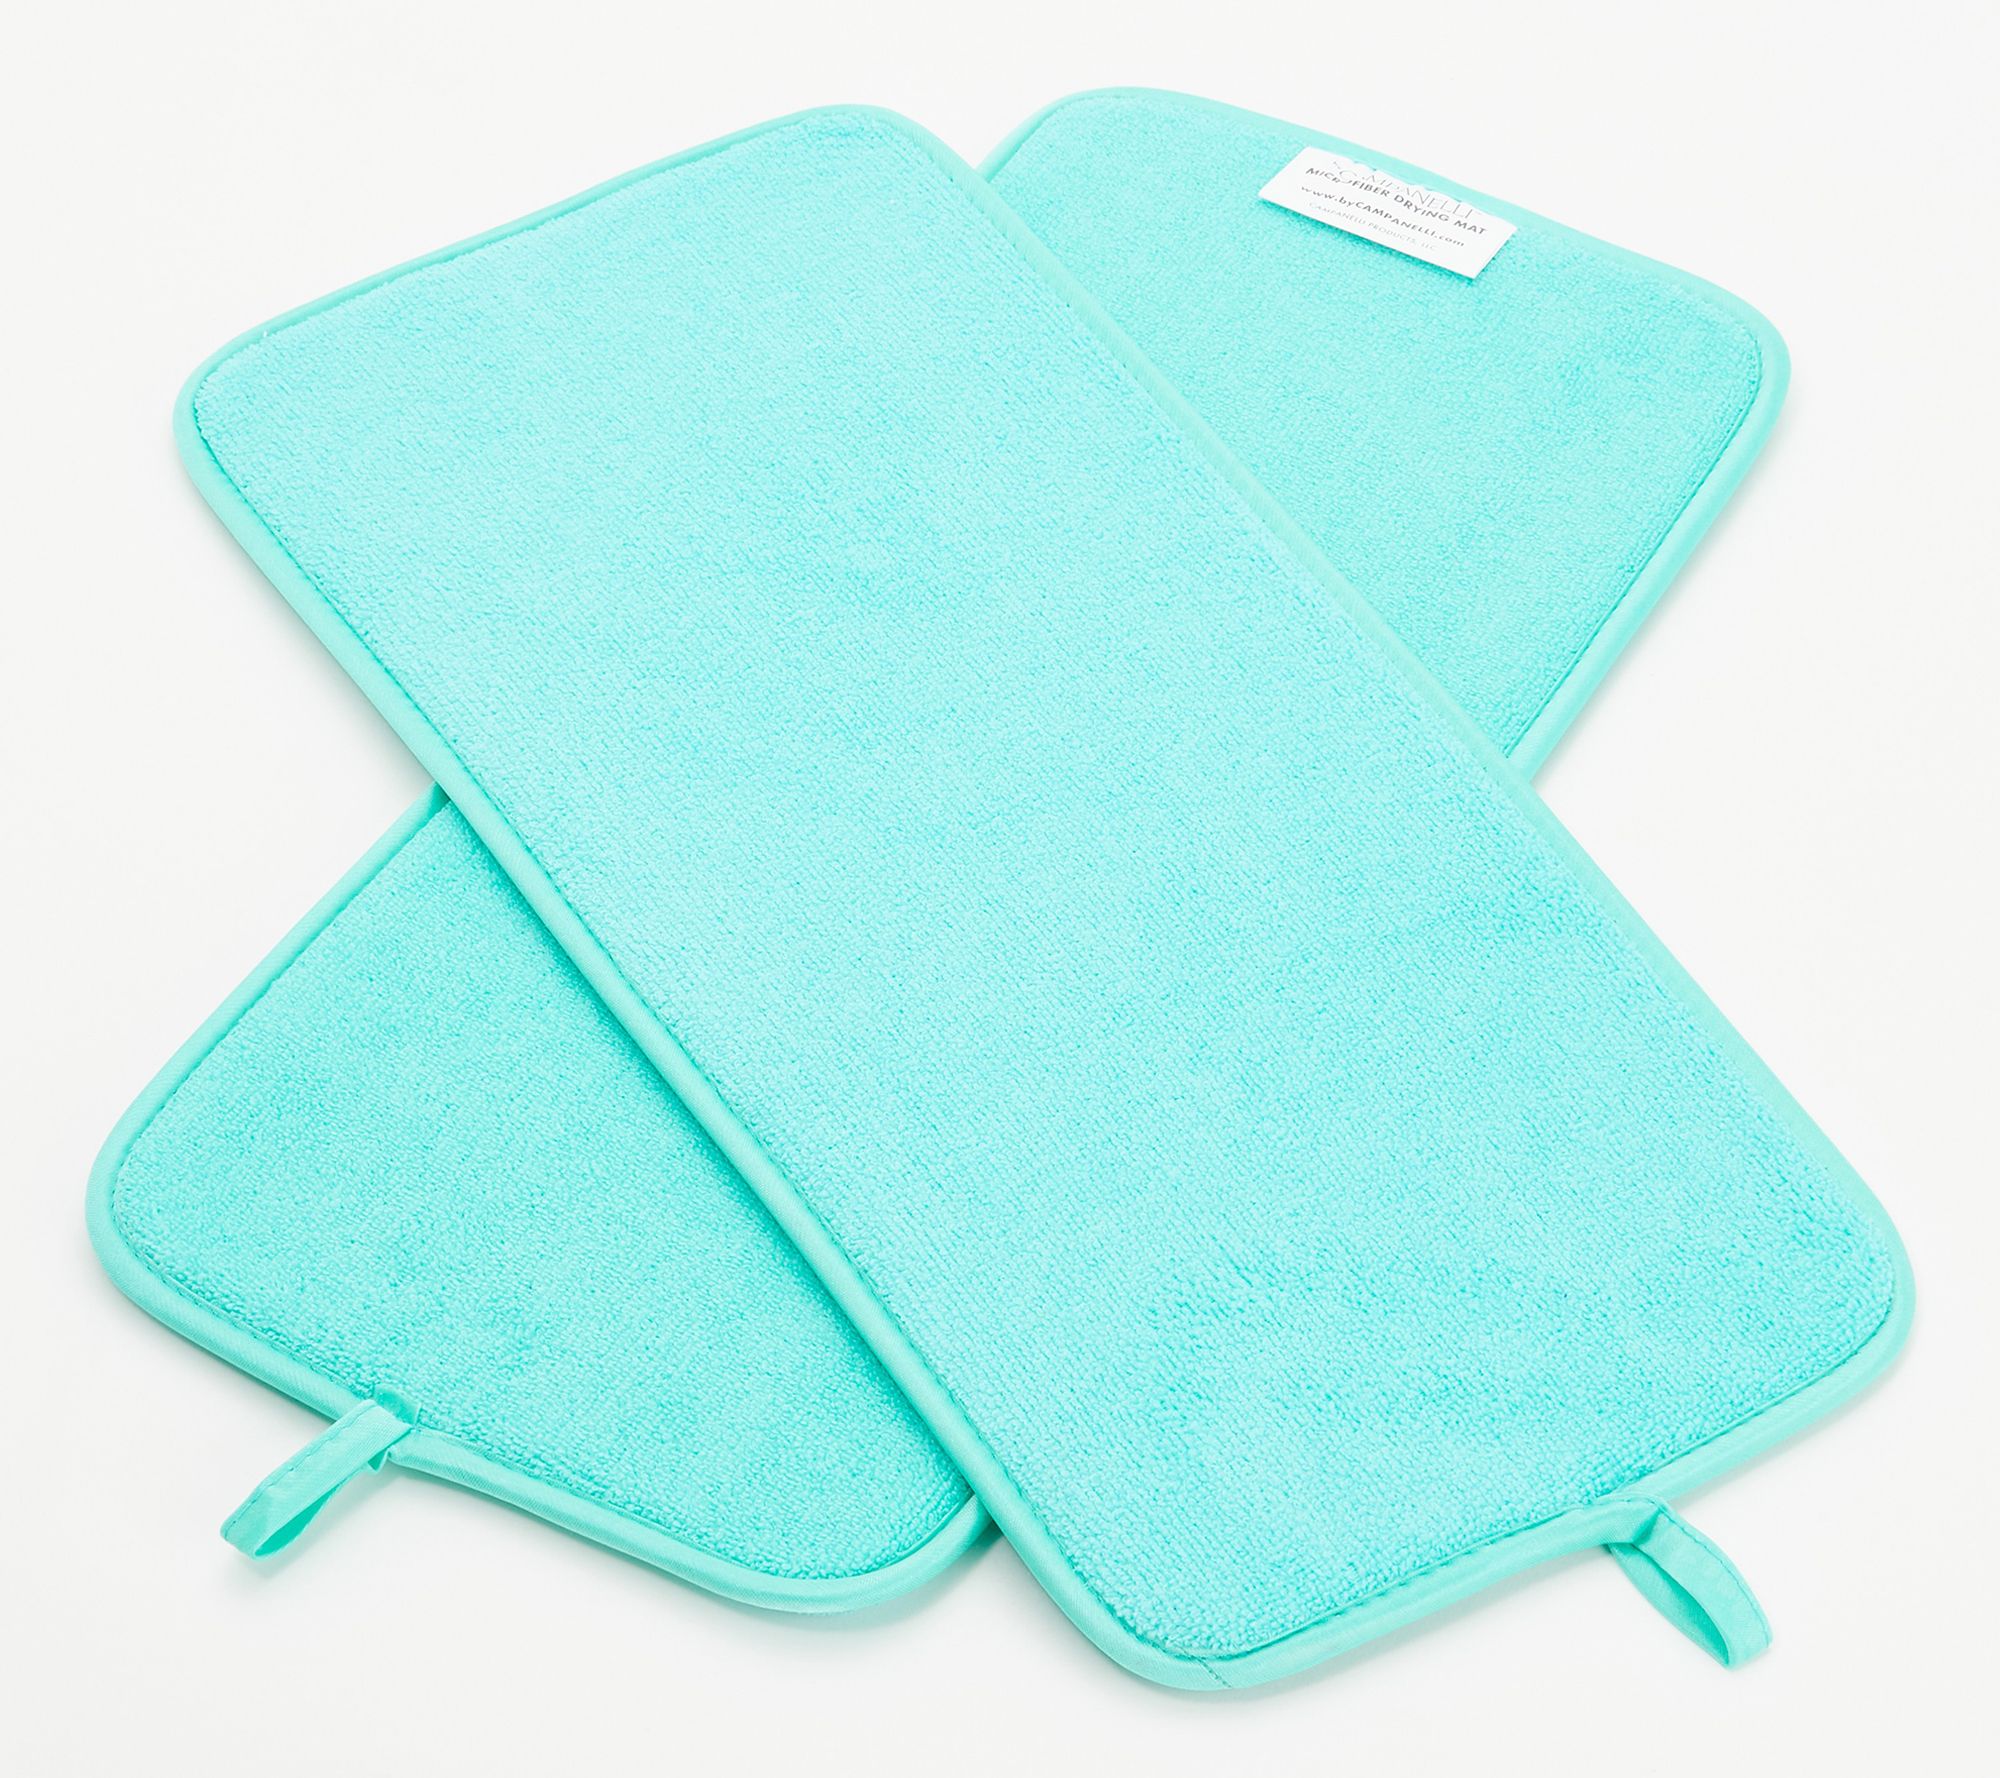 Set of 8 Microfiber Sponge Set with 2 Drying Mats by Campanelli in Blue